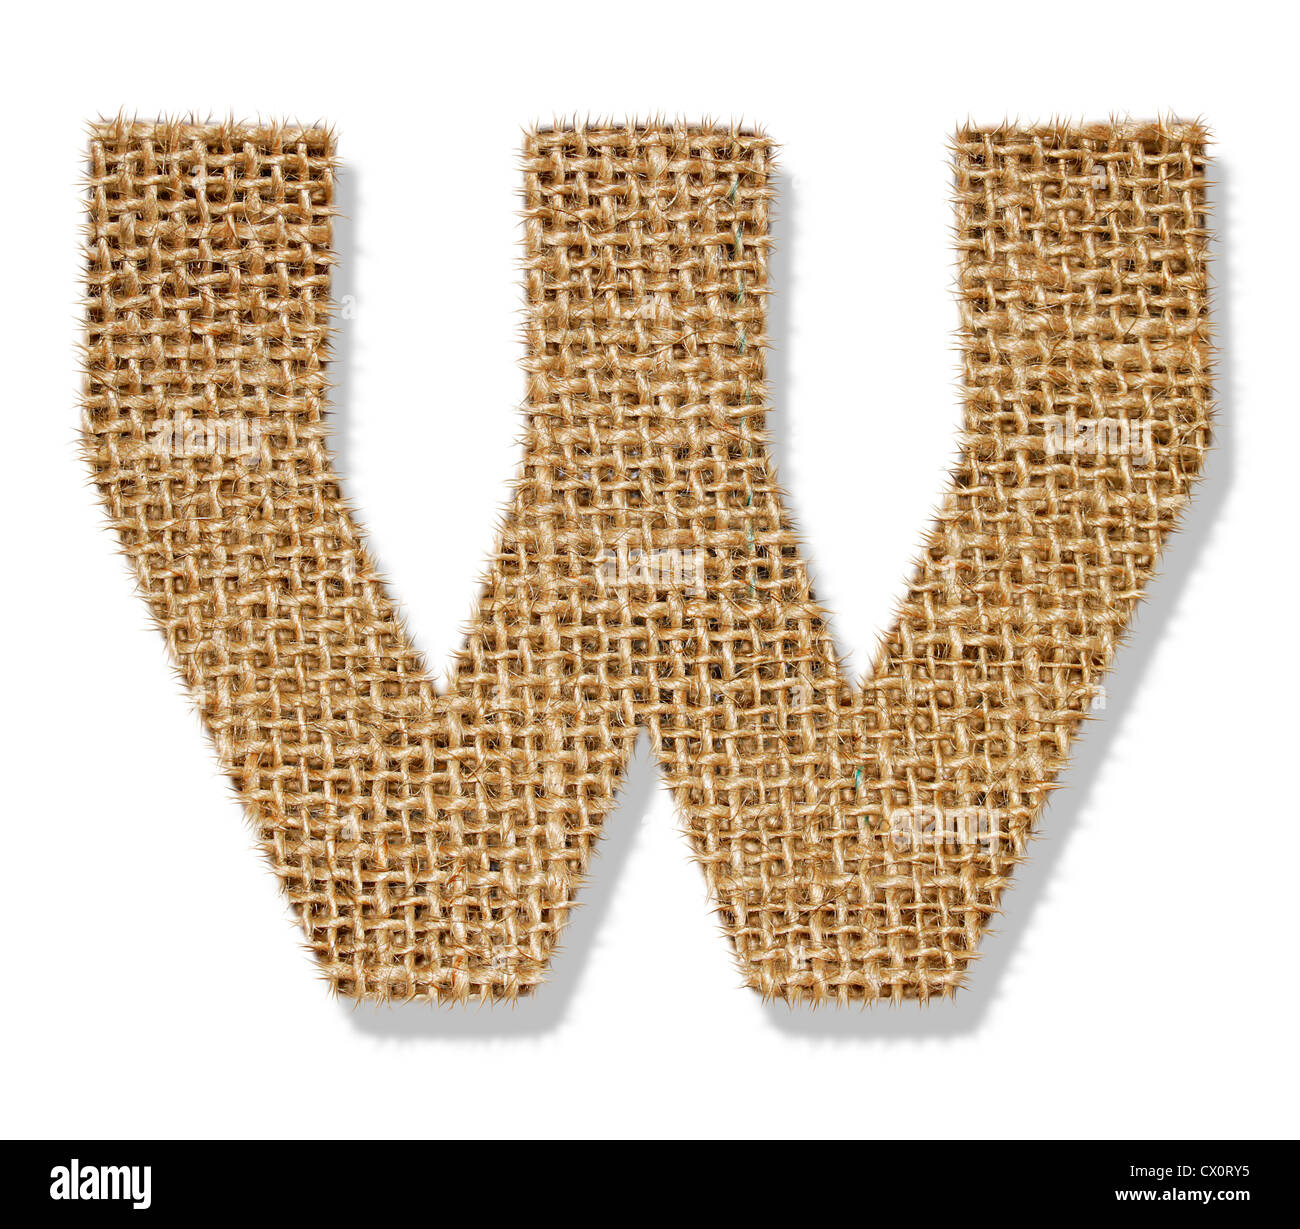 The letter 'W' is made of coarse cloth. Stock Photo